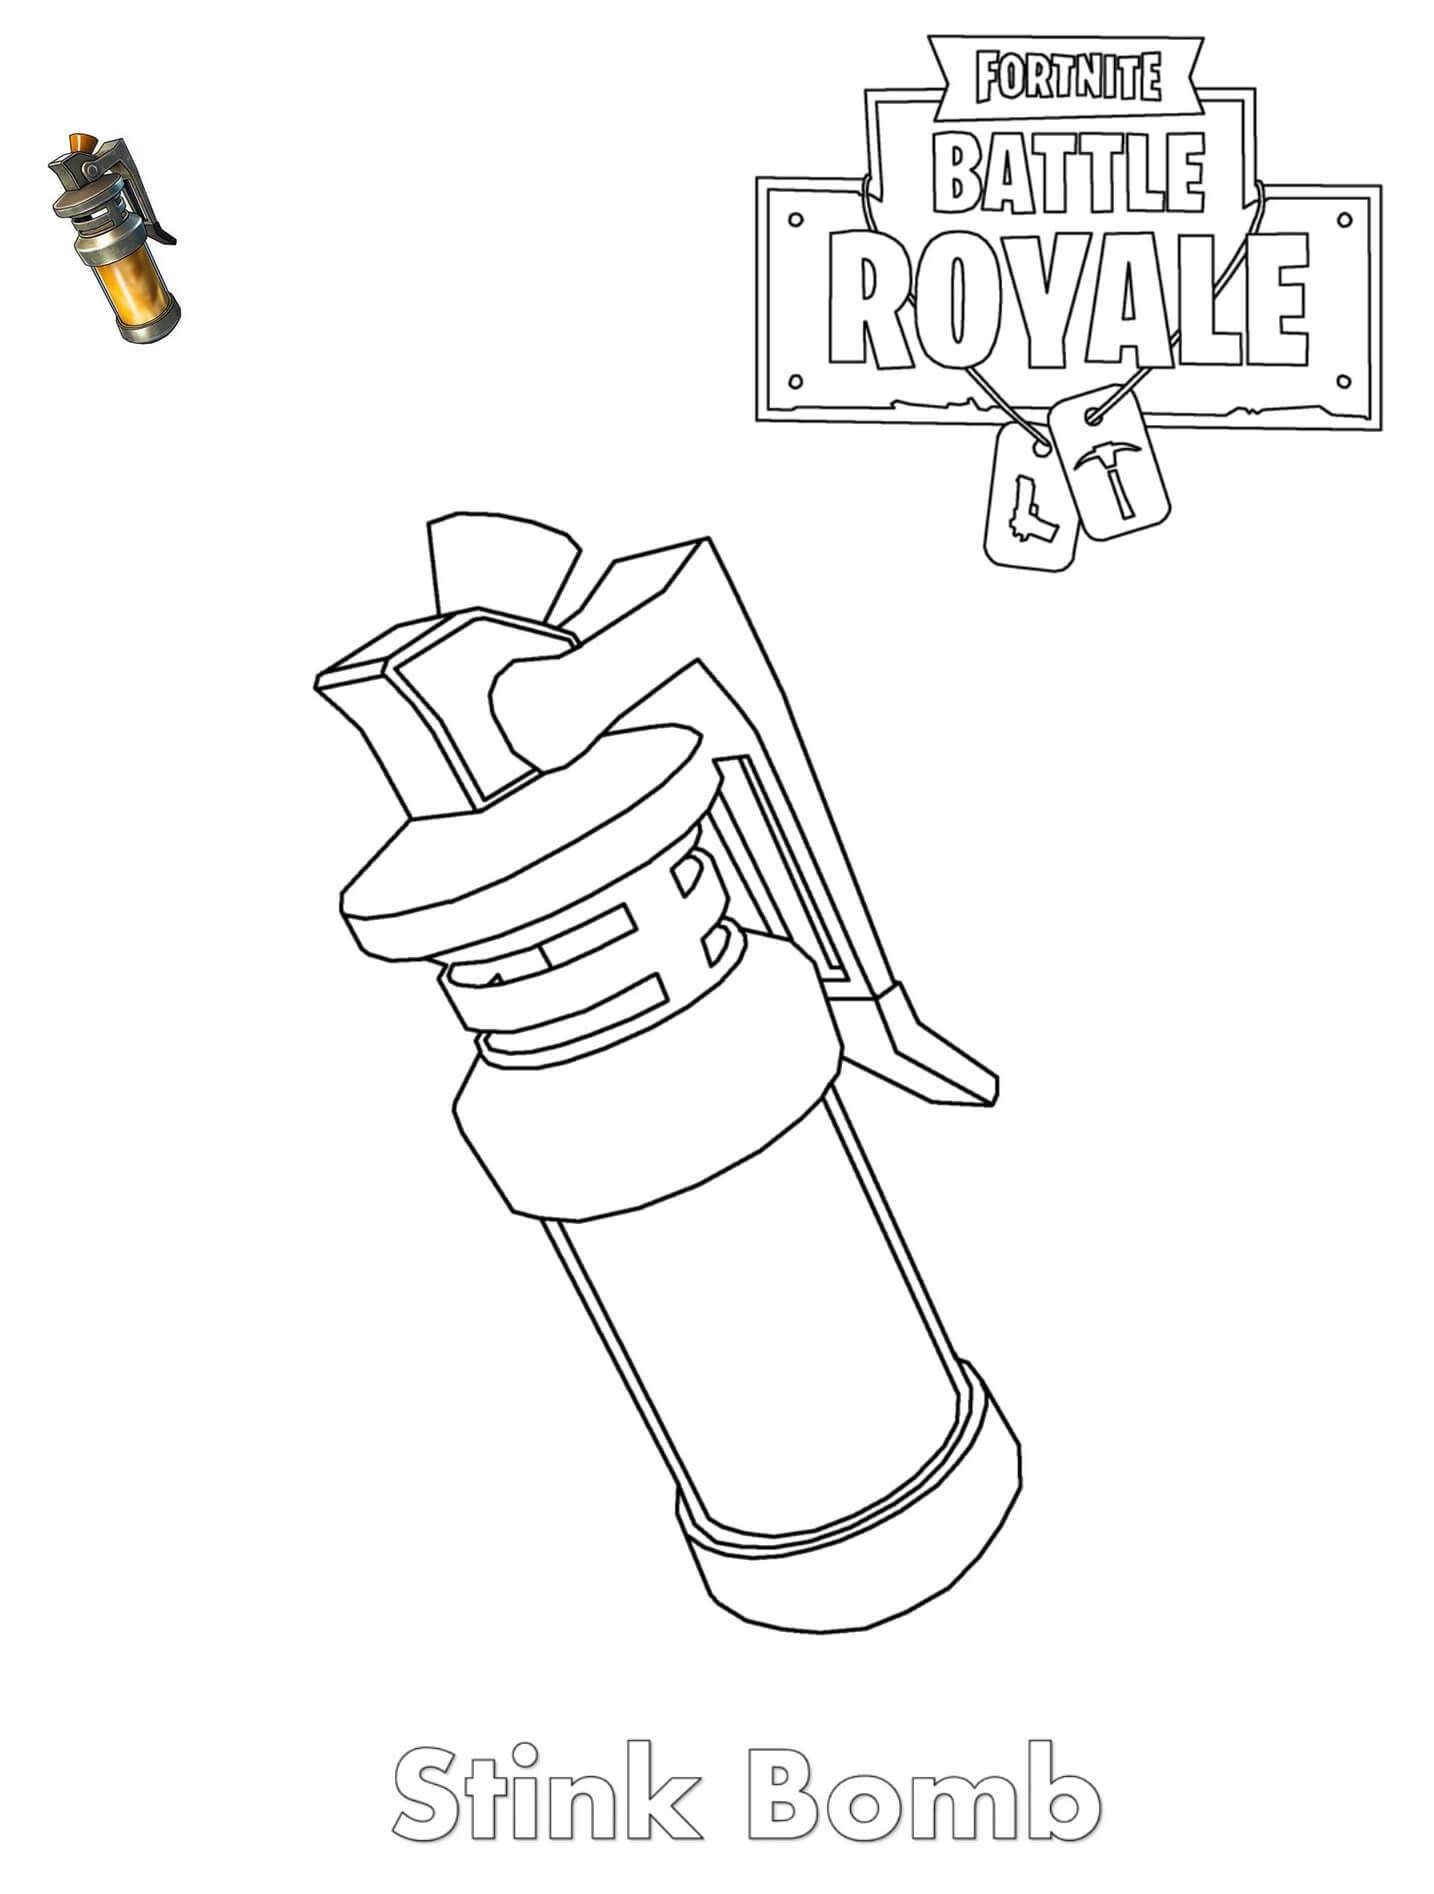 Free Fortnite Skin Coloring Pages Stink Bomb printable